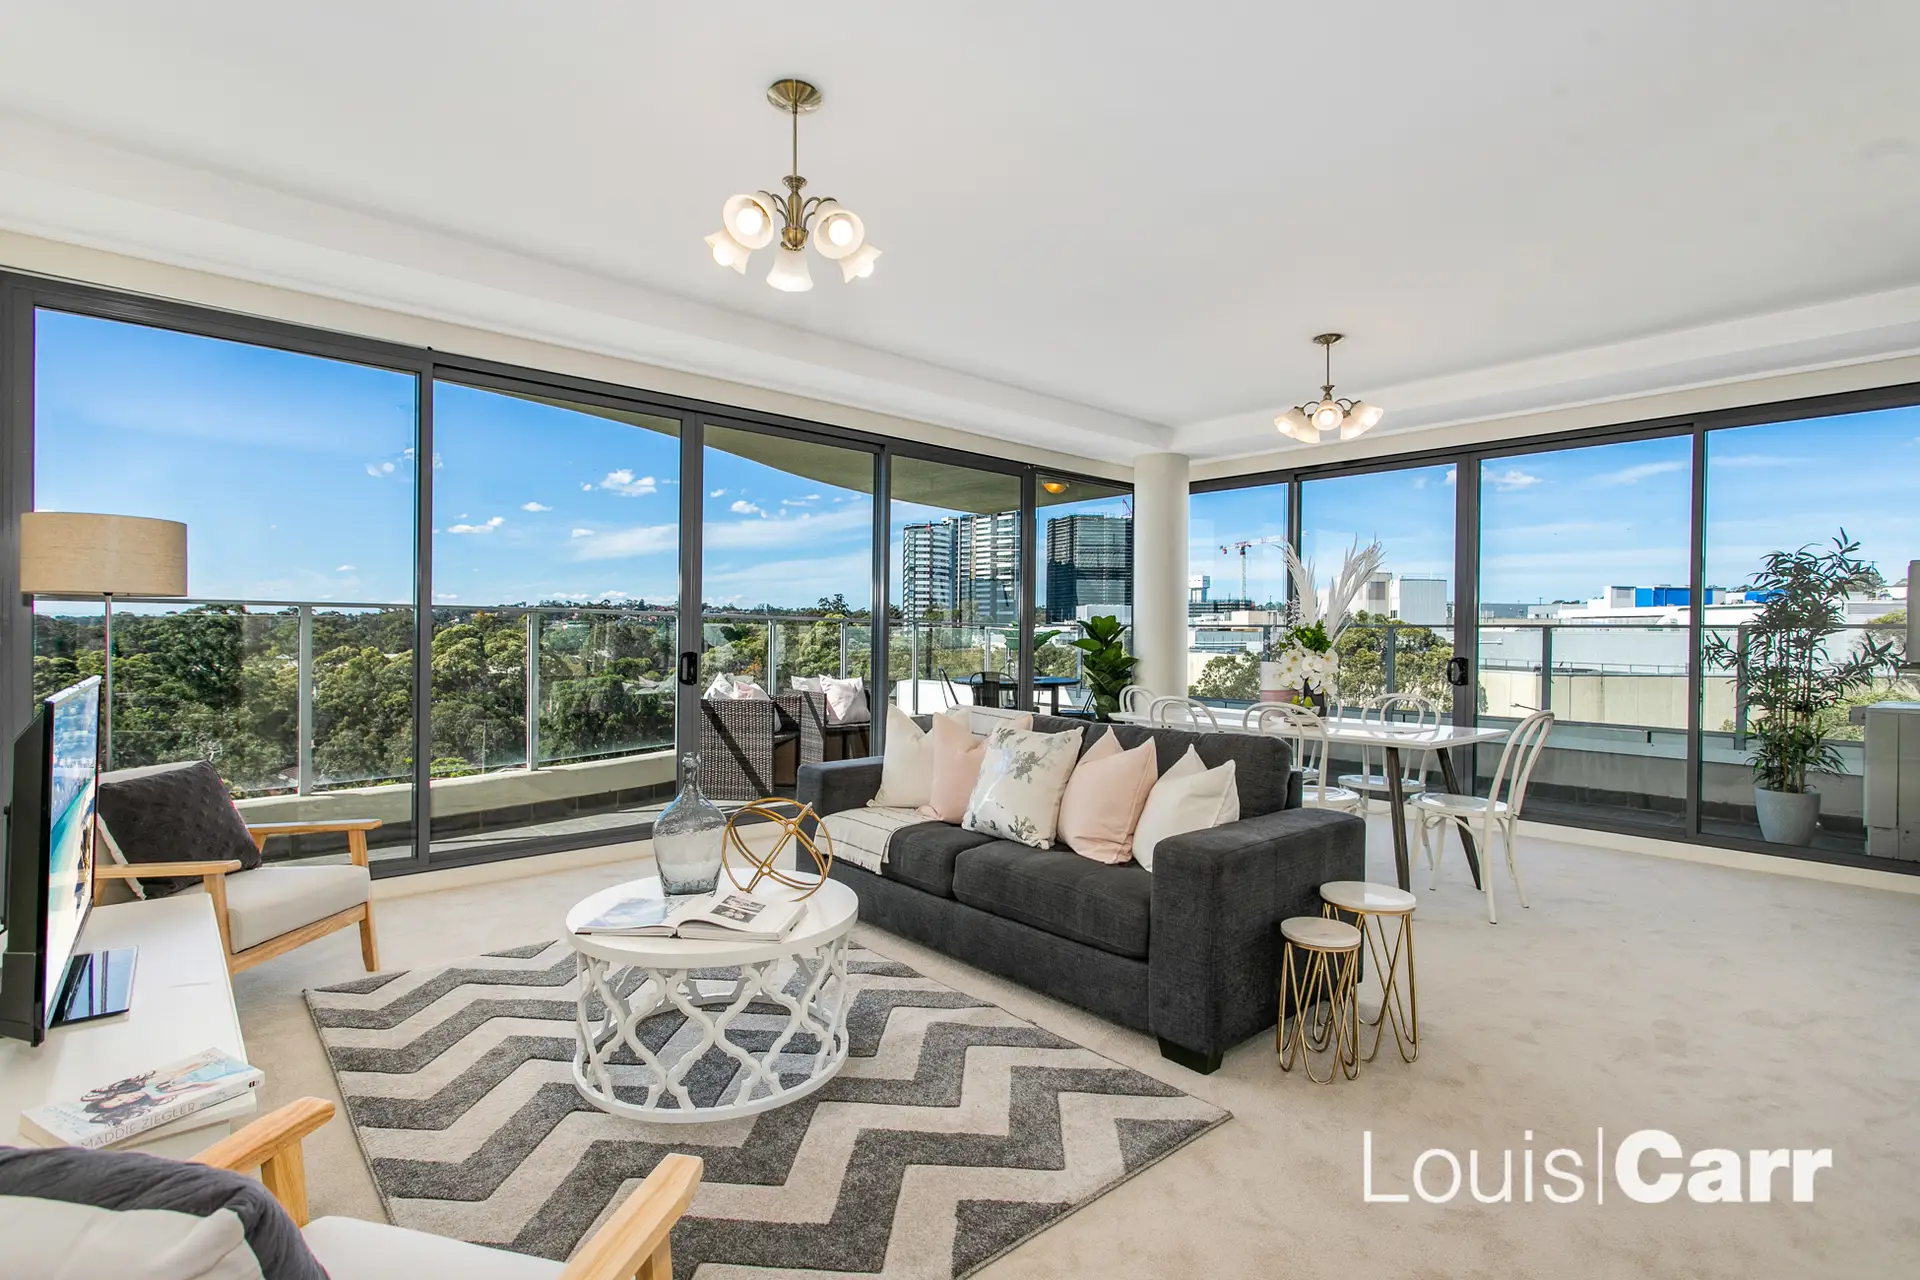 Photo #2: 707/12 Pennant Street, Castle Hill - Sold by Louis Carr Real Estate